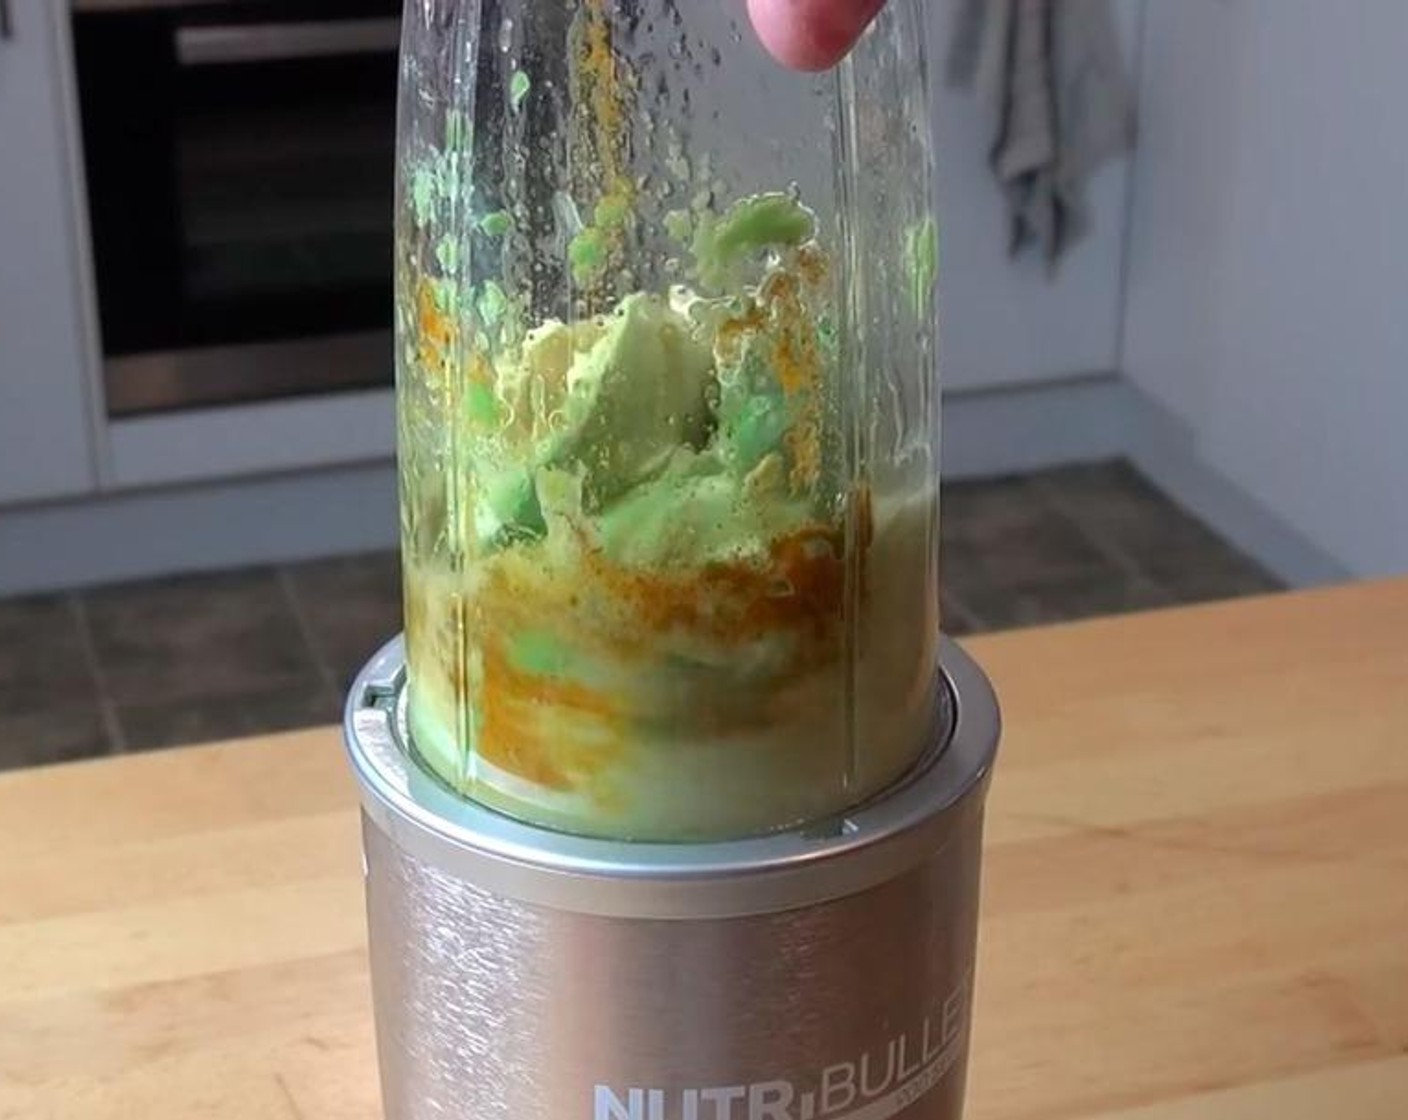 step 2 Scoop out the Avocados (2) into a mixer. Add Olive Oil (1/4 cup), Freshly Squeezed Lemon (1), Ground Cumin (1 tsp), Ground Turmeric (1/4 tsp), Salt (to taste), and Ground Black Pepper (to taste). Use the mixer to create the sauce.